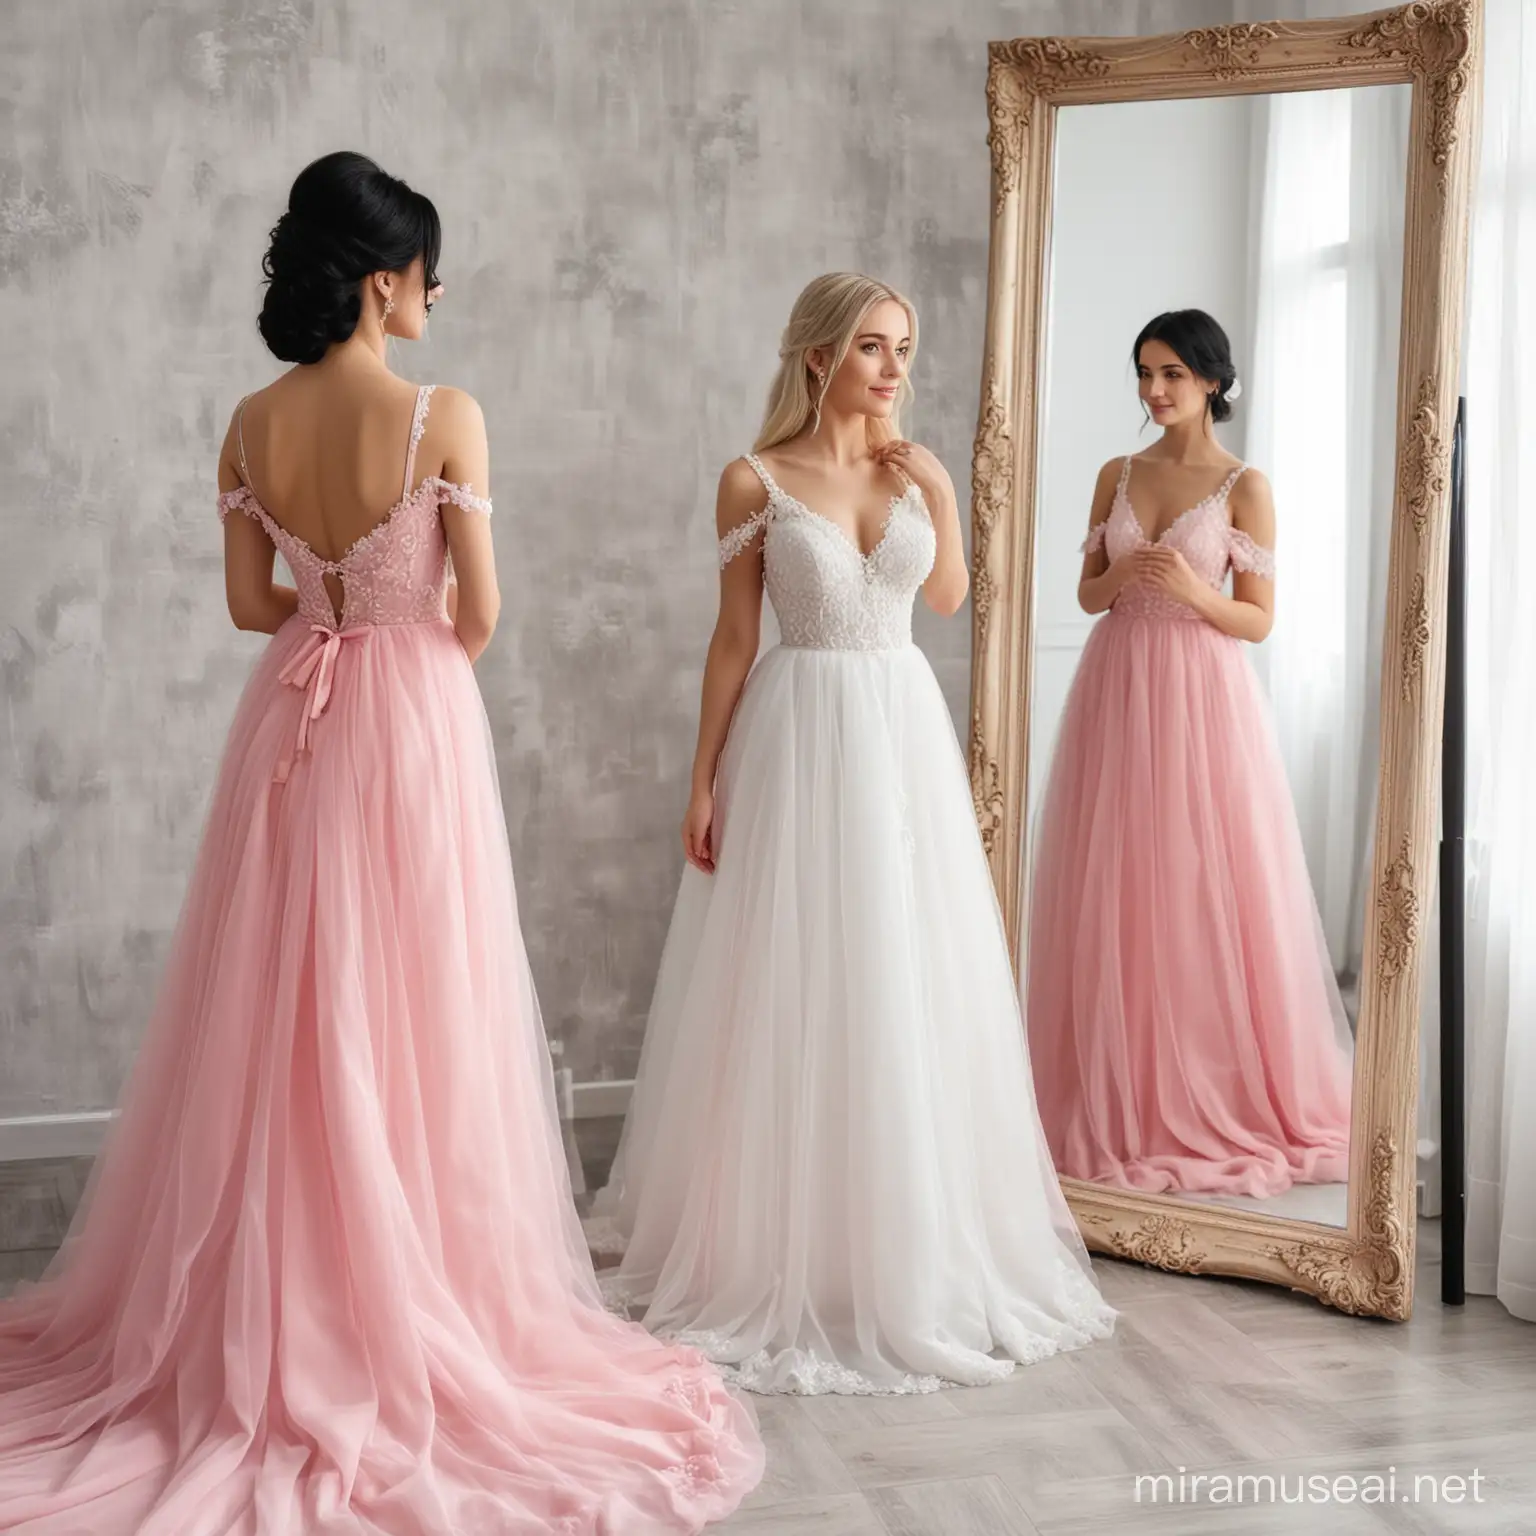 Blonde Bride and Bridesmaid in White and Pink Dresses at Mirror